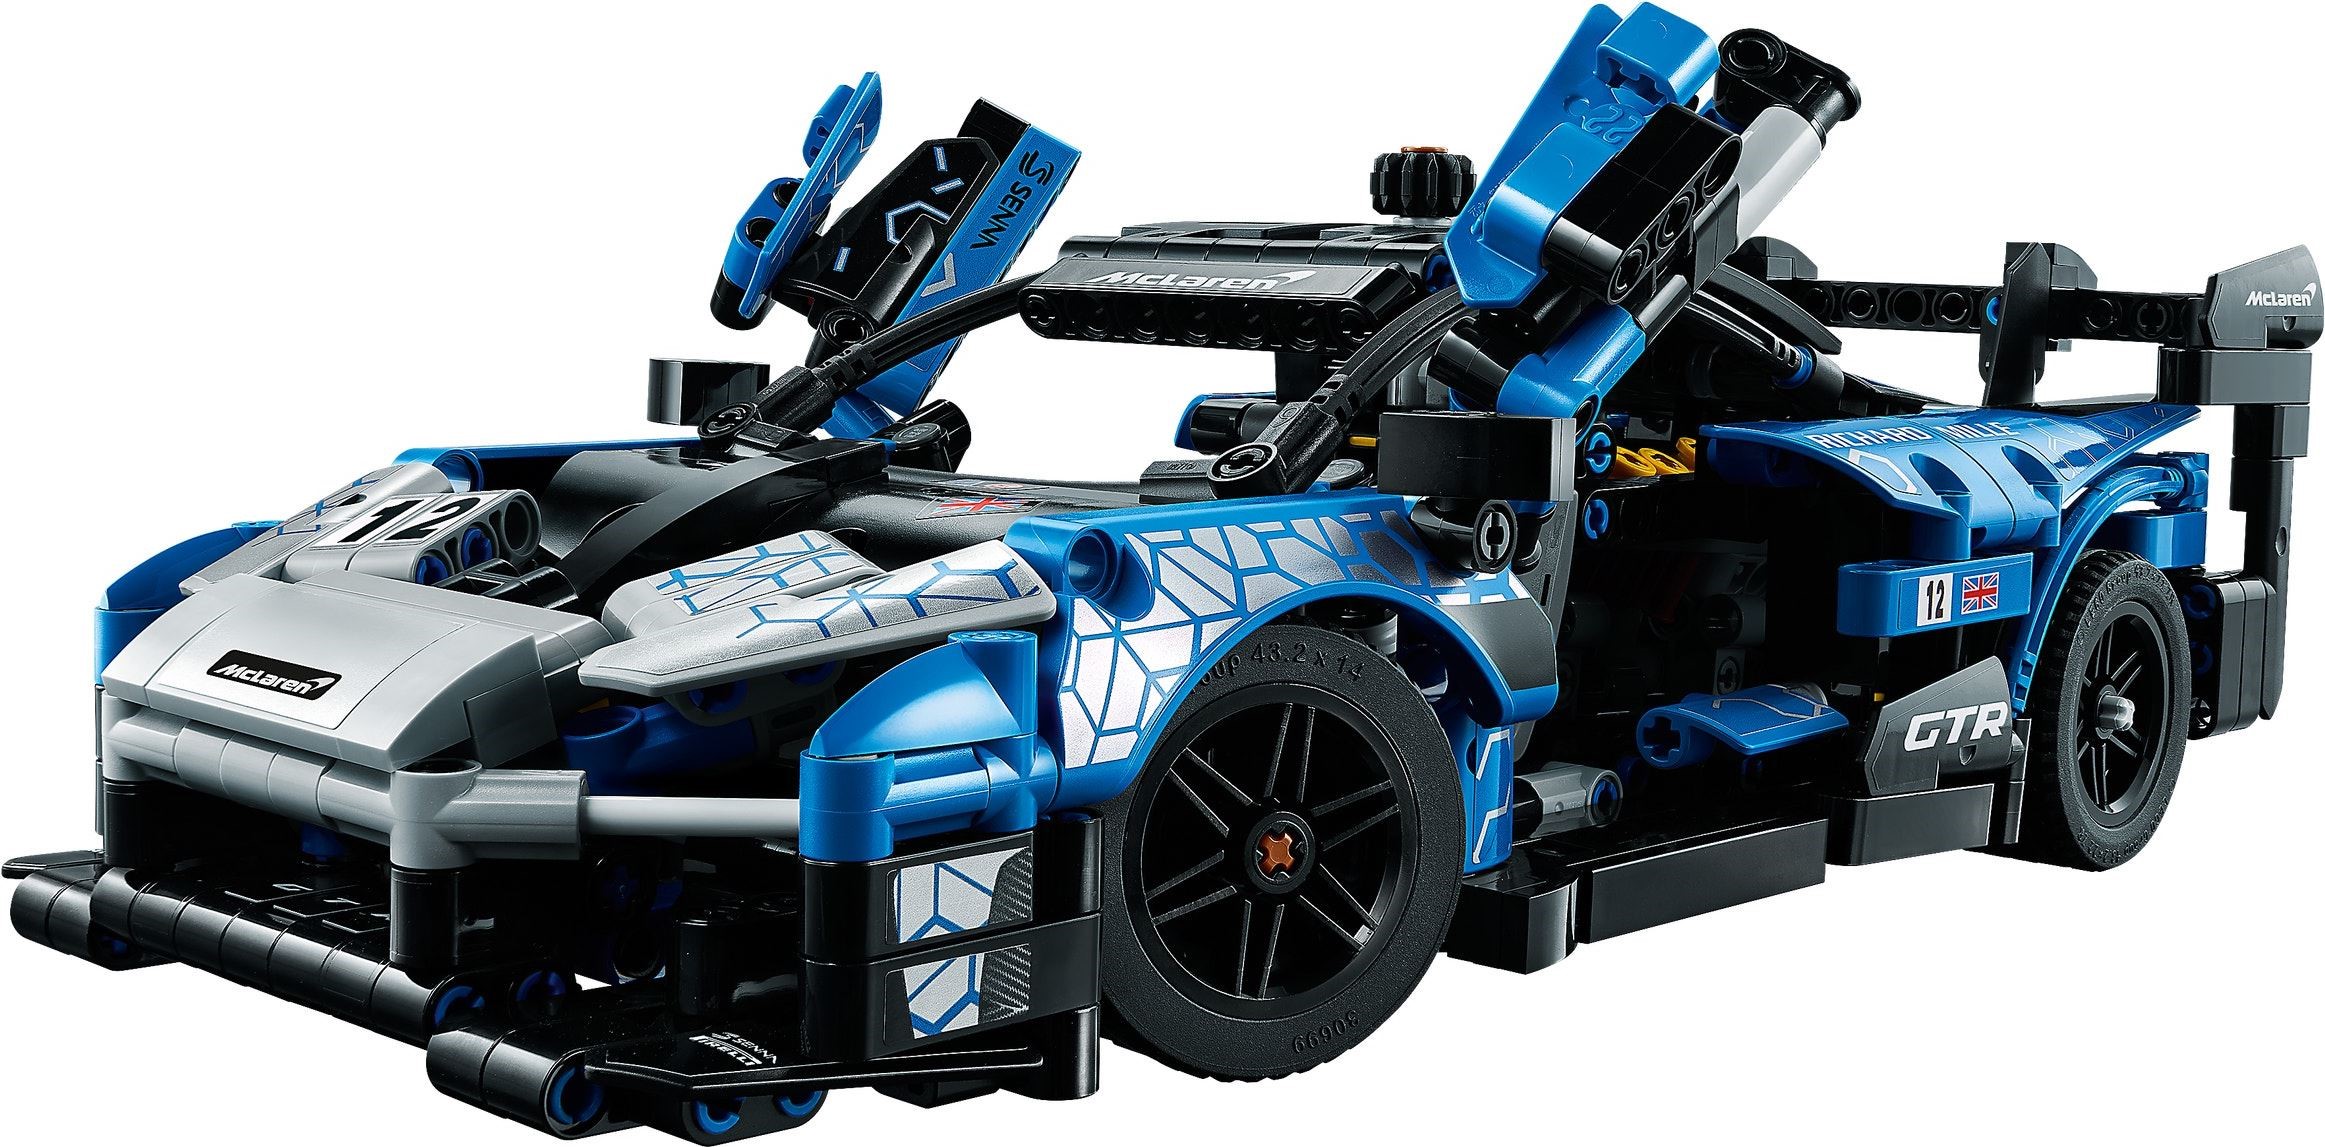 Lego McLaren Senna took 9 times longer to build than the real thing - CNET